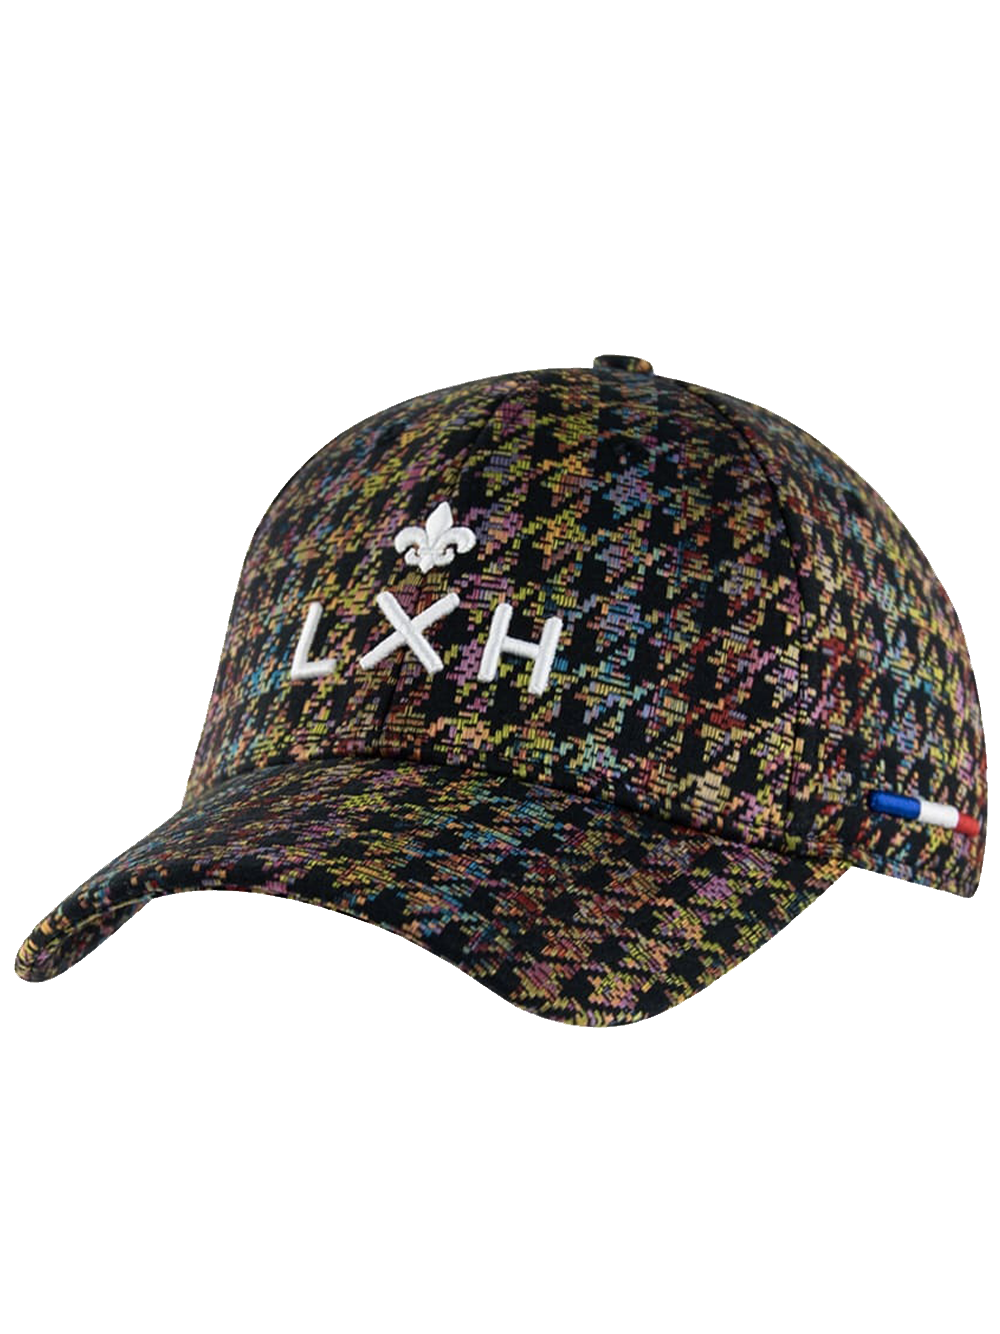 Multicolored houndstooth cap